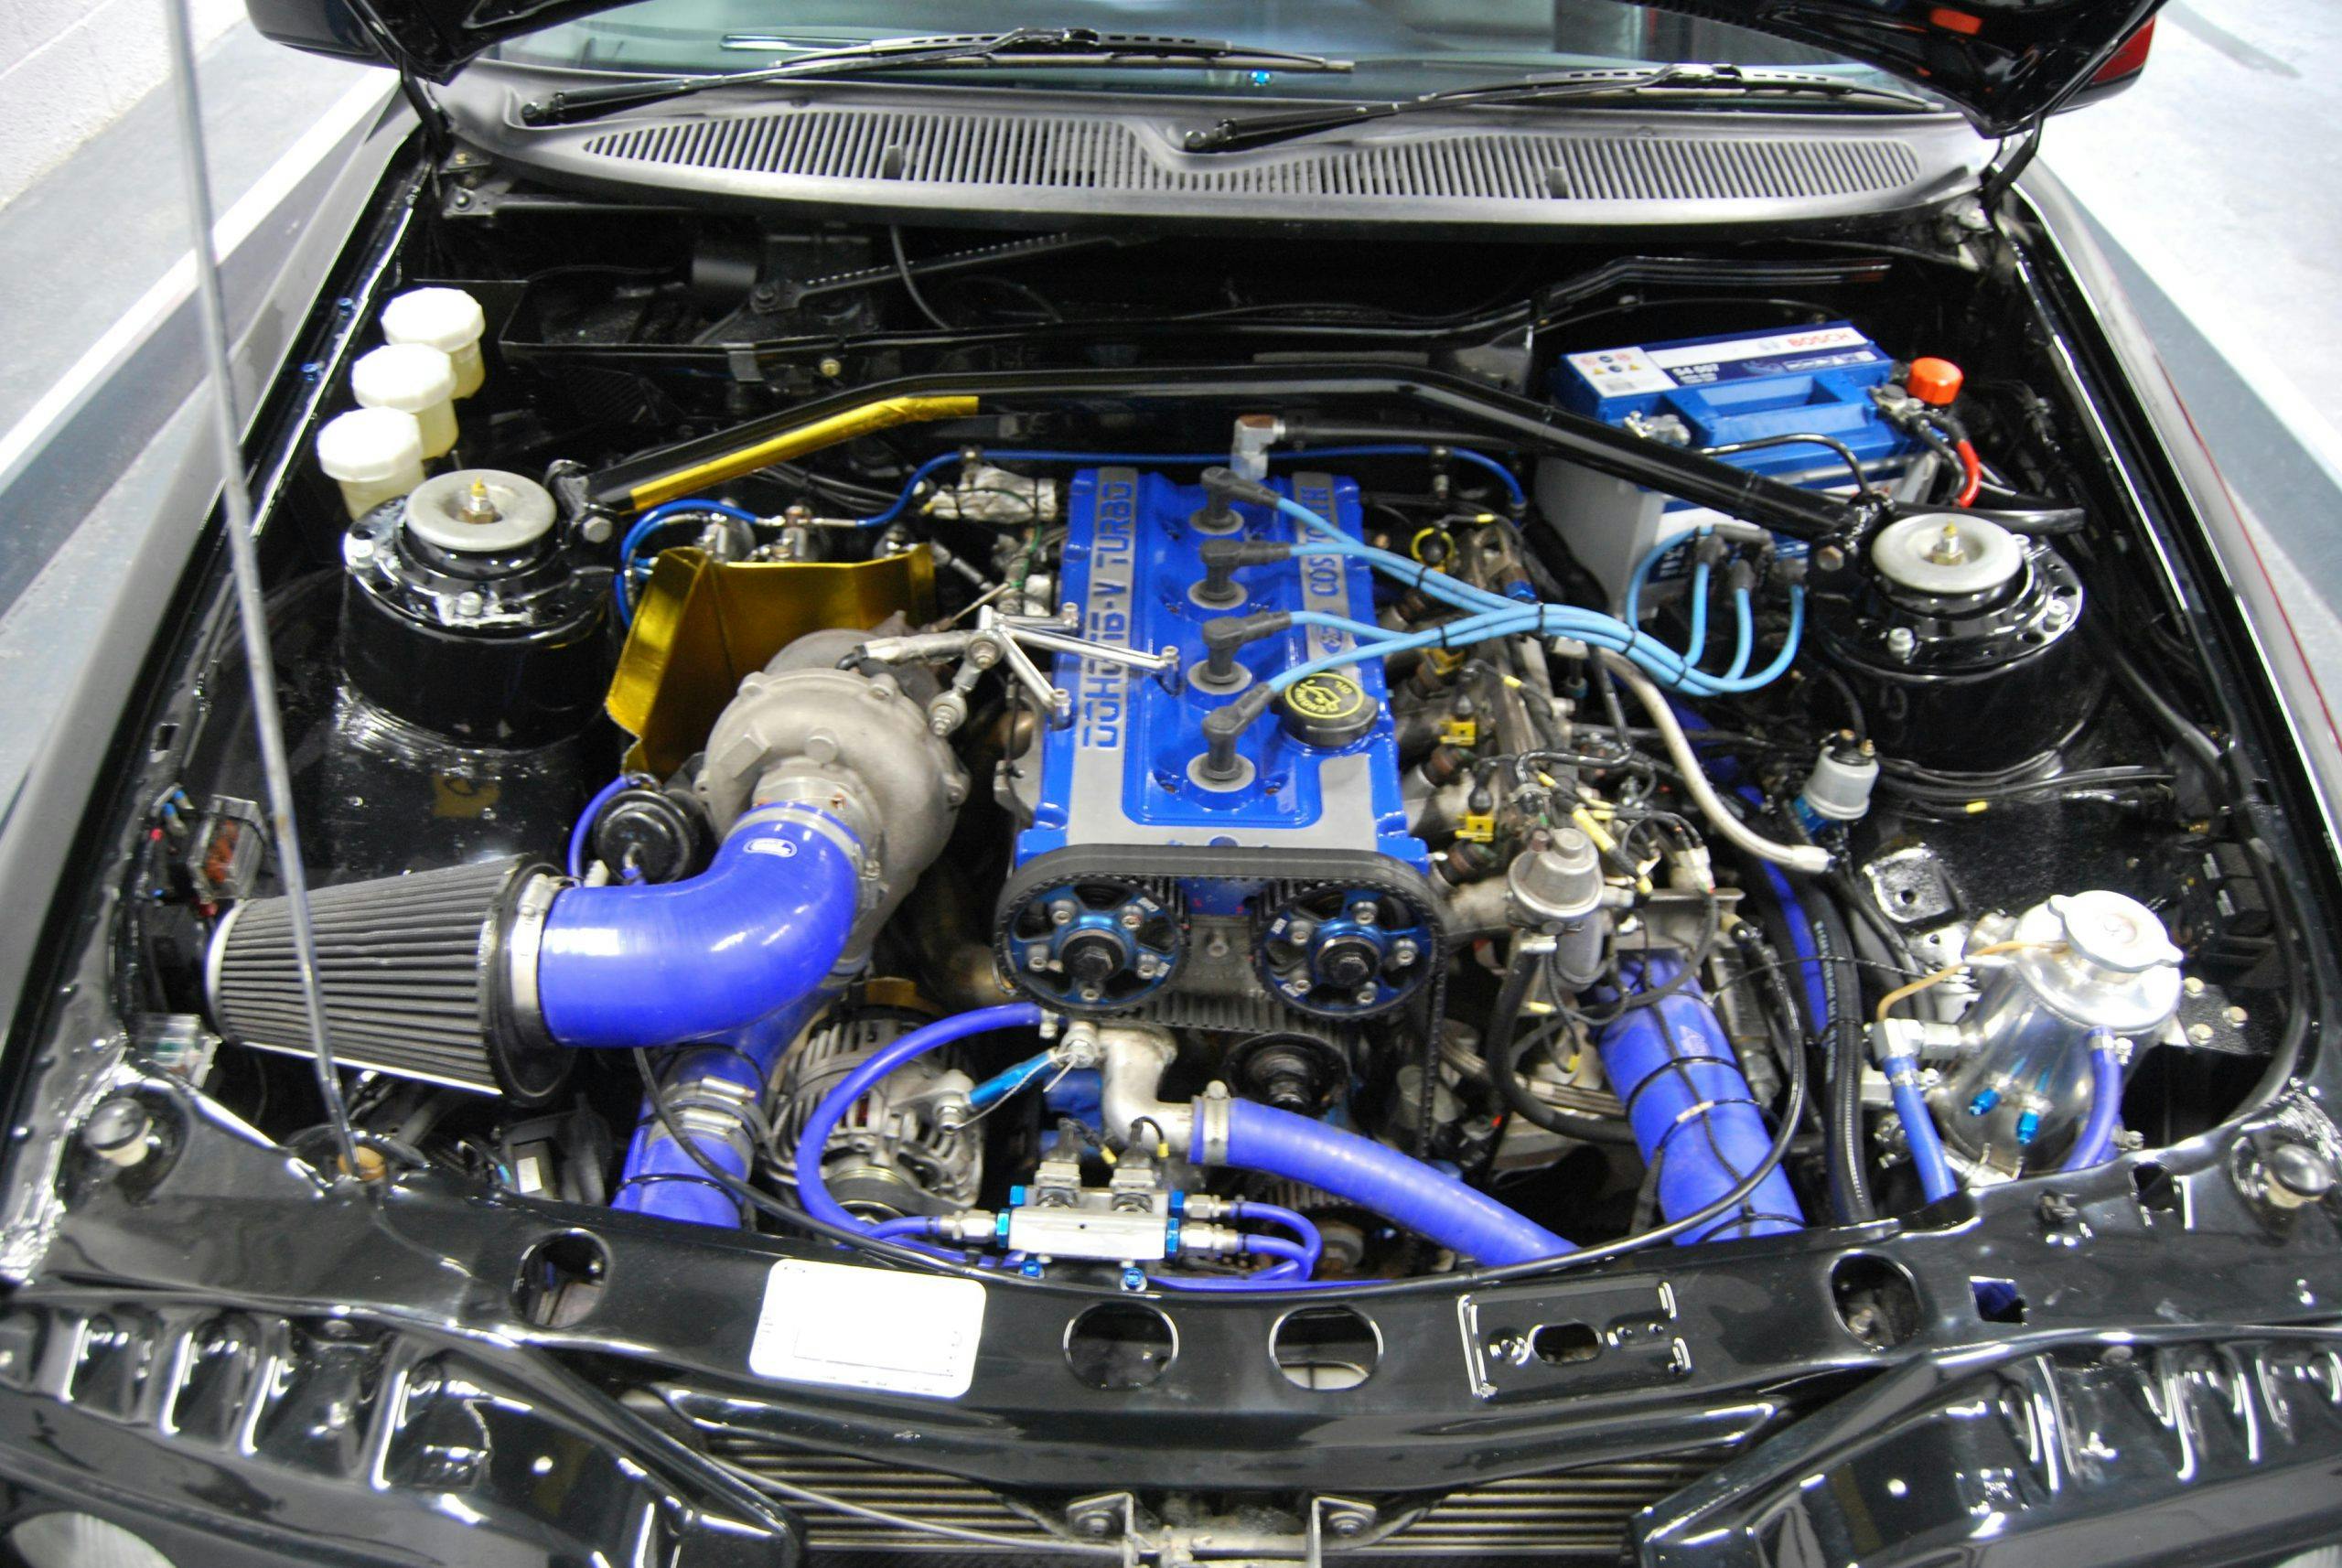 1990 Ford Sierra Sapphire RS Cosworth 4x4 Engine